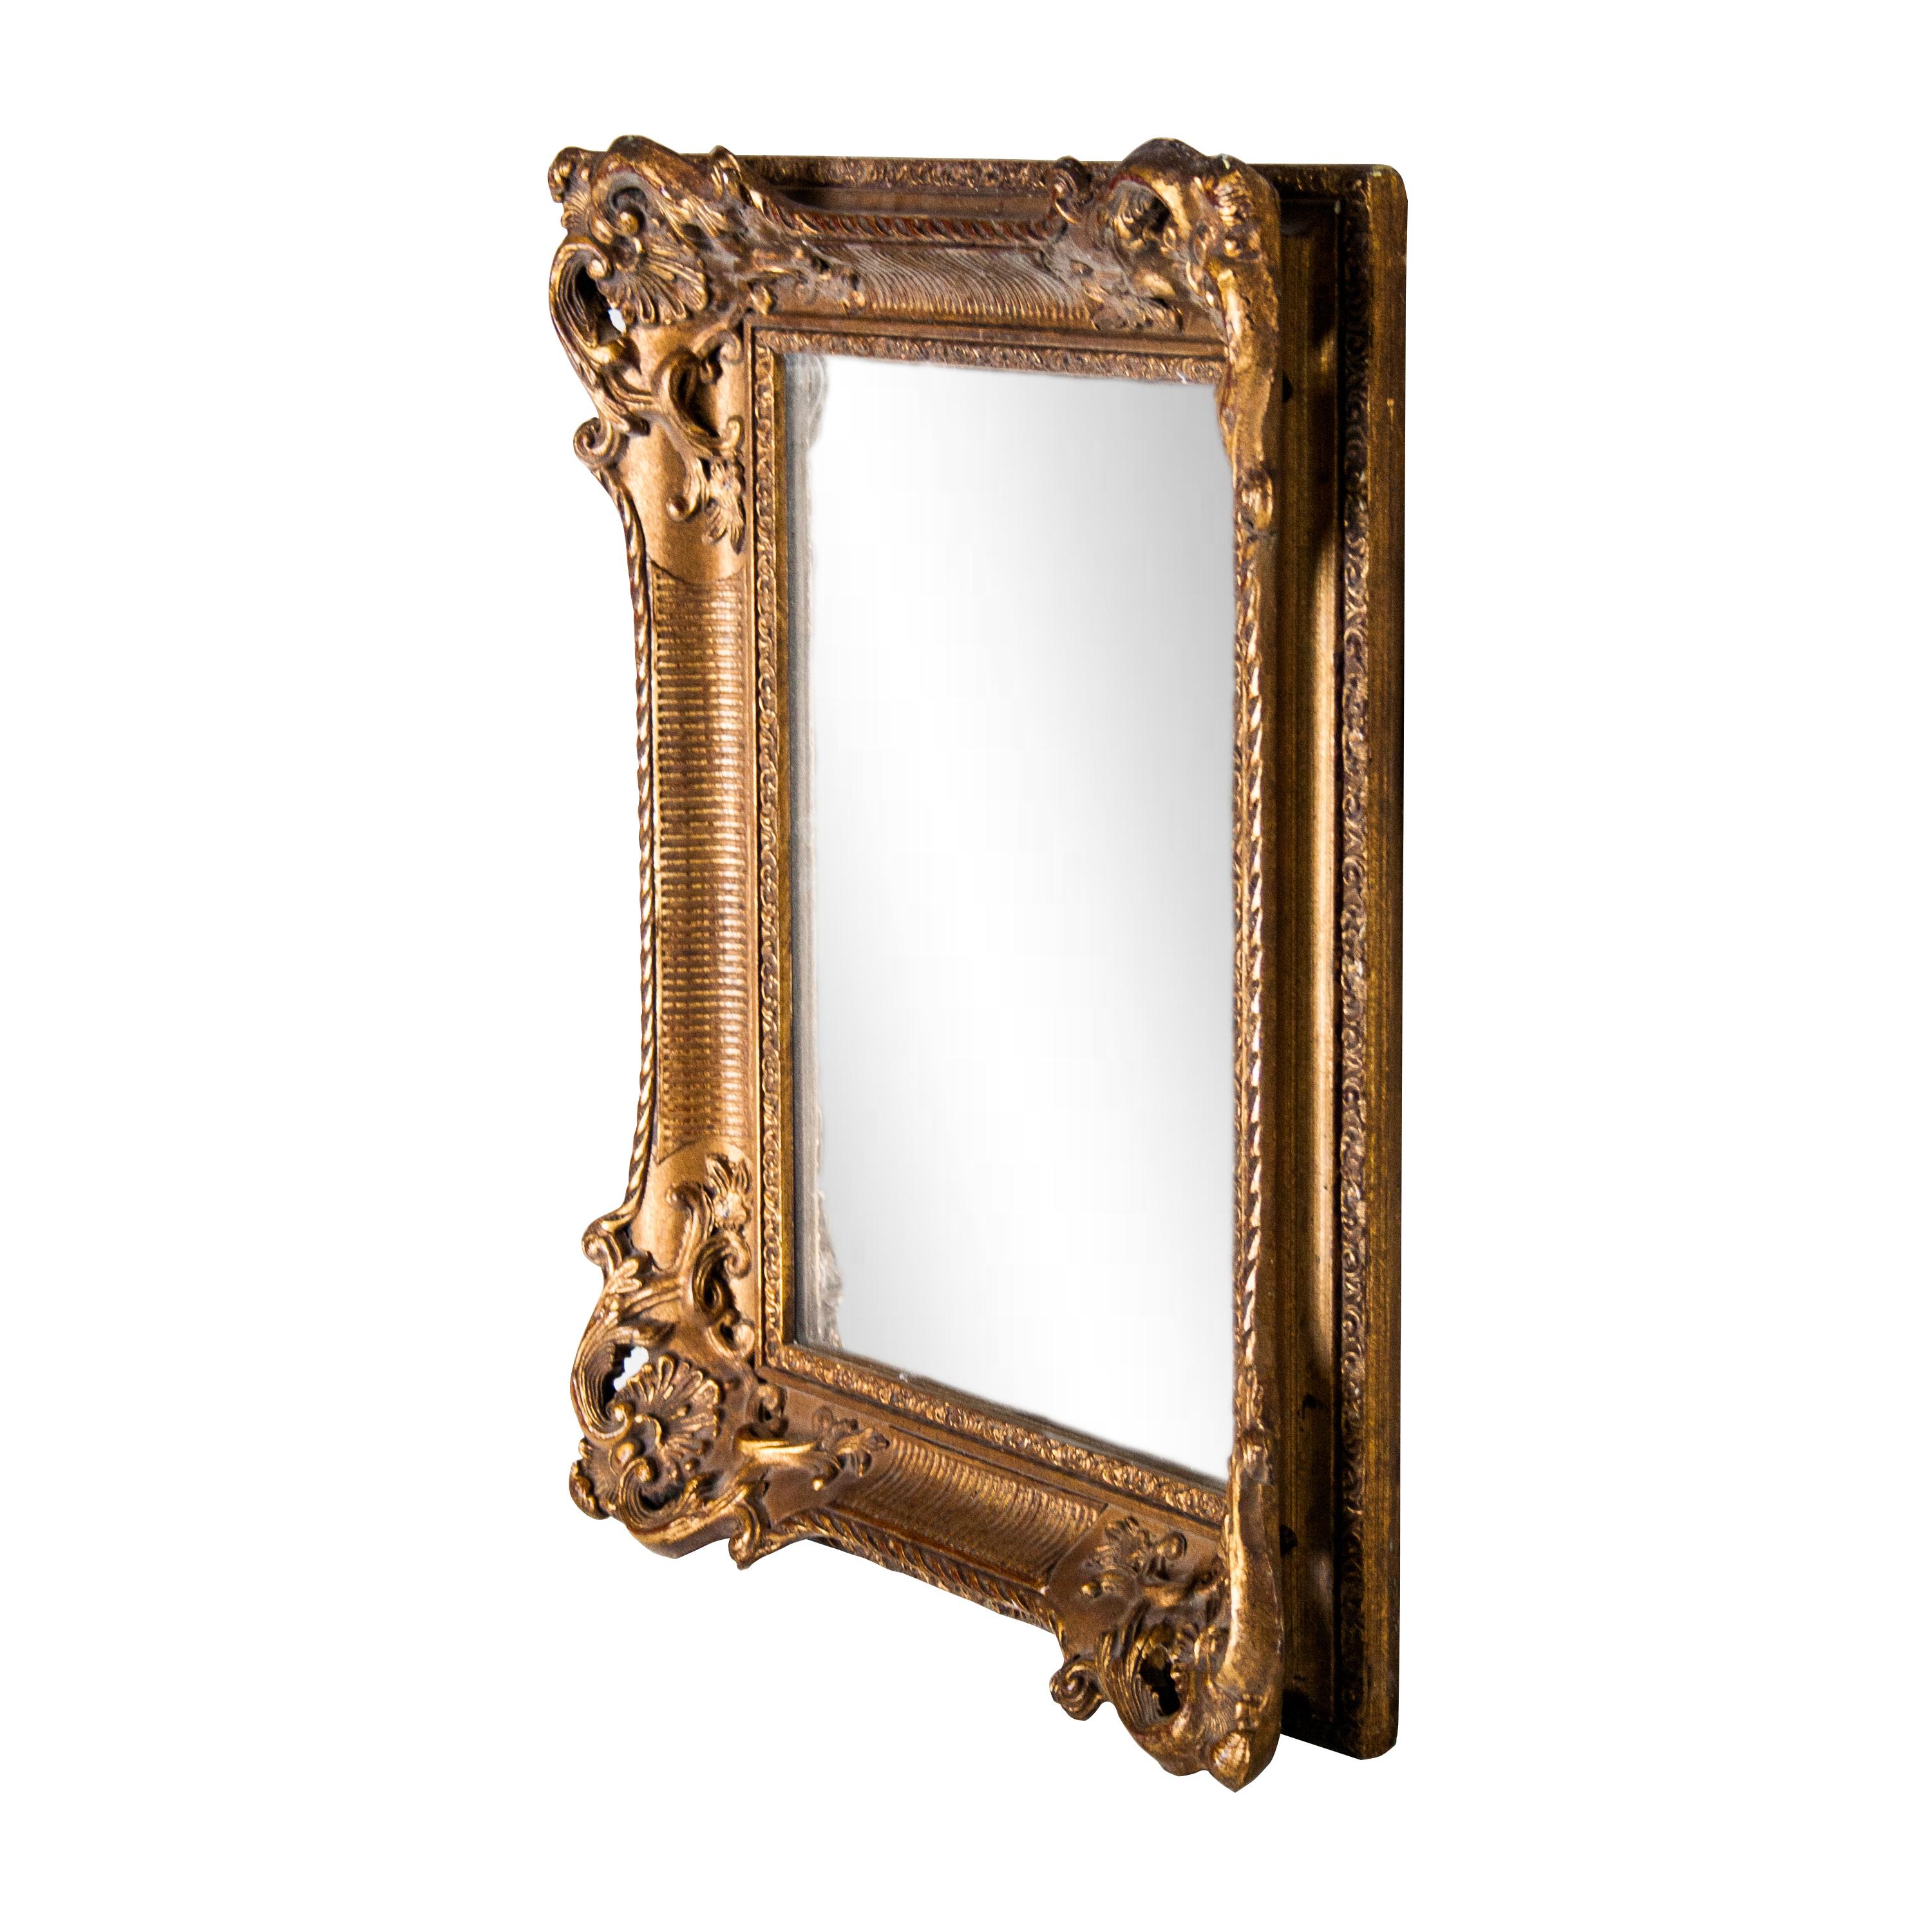 Neoclassical baroque style handcrafted mirror. Hand carved wooden structure with gold foil finished, Spain, 1970.